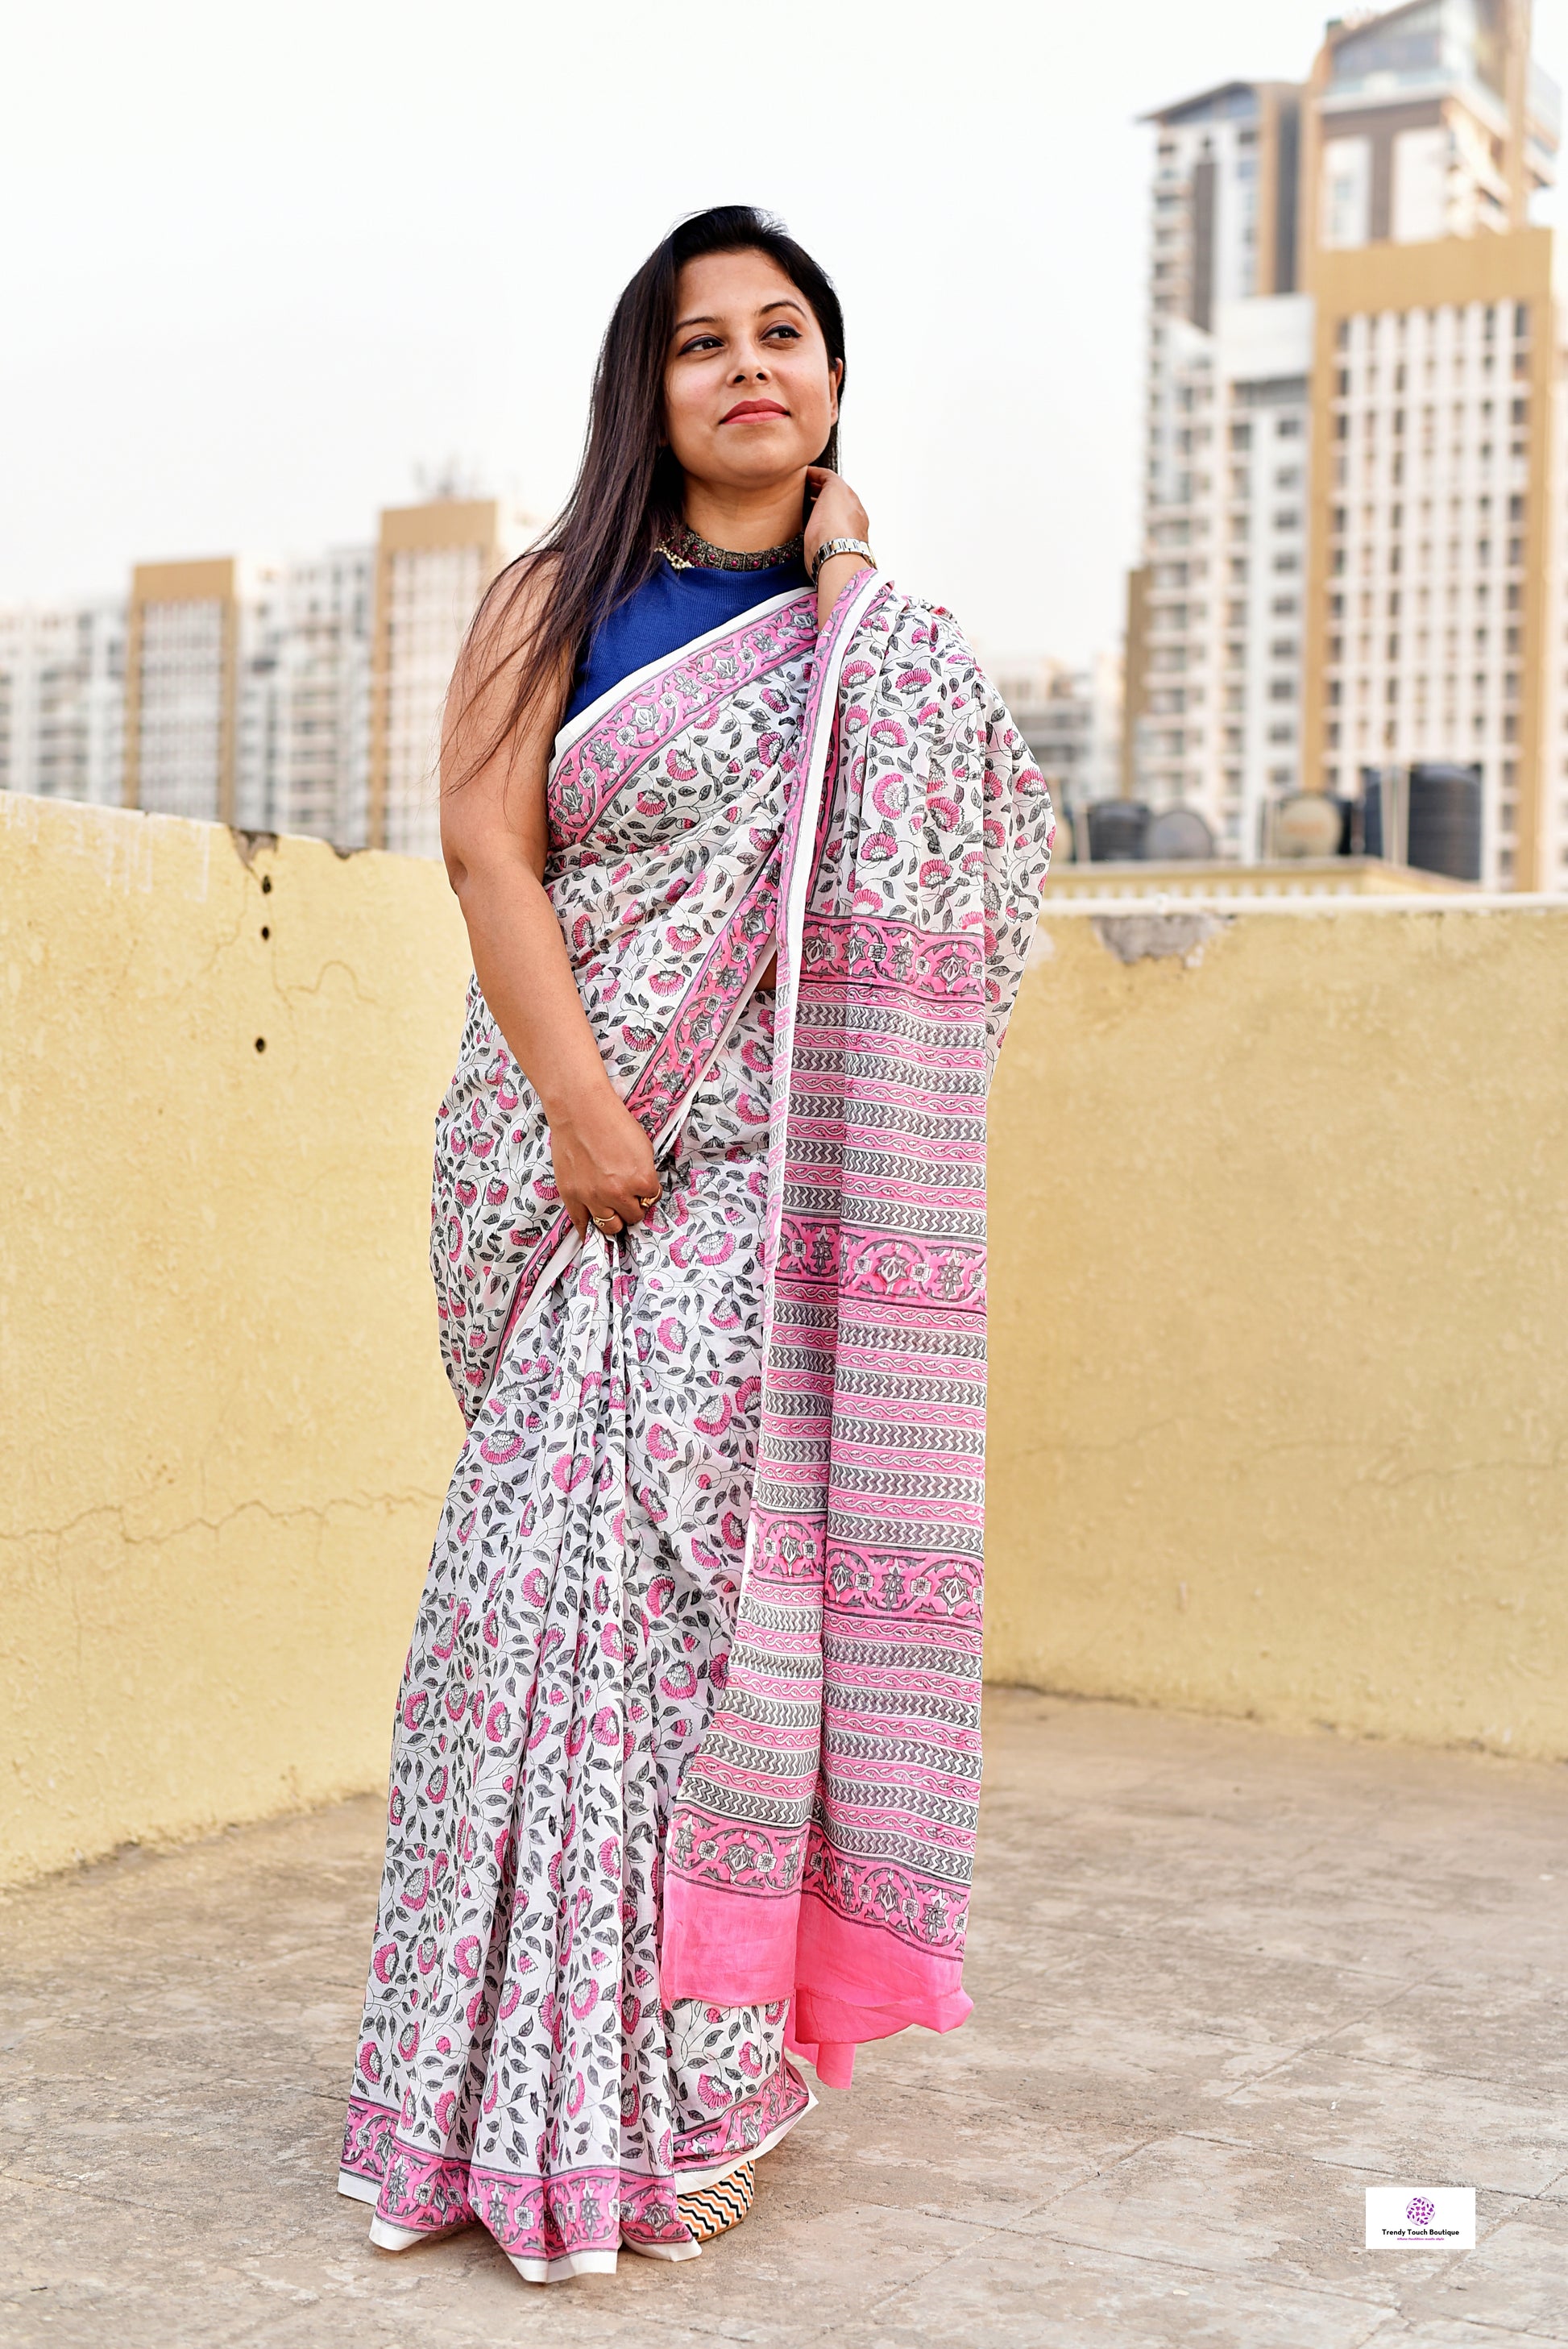 pink white green handblockprint mulcotton saree best summer fabric for office and casual styling with blouse piece best price